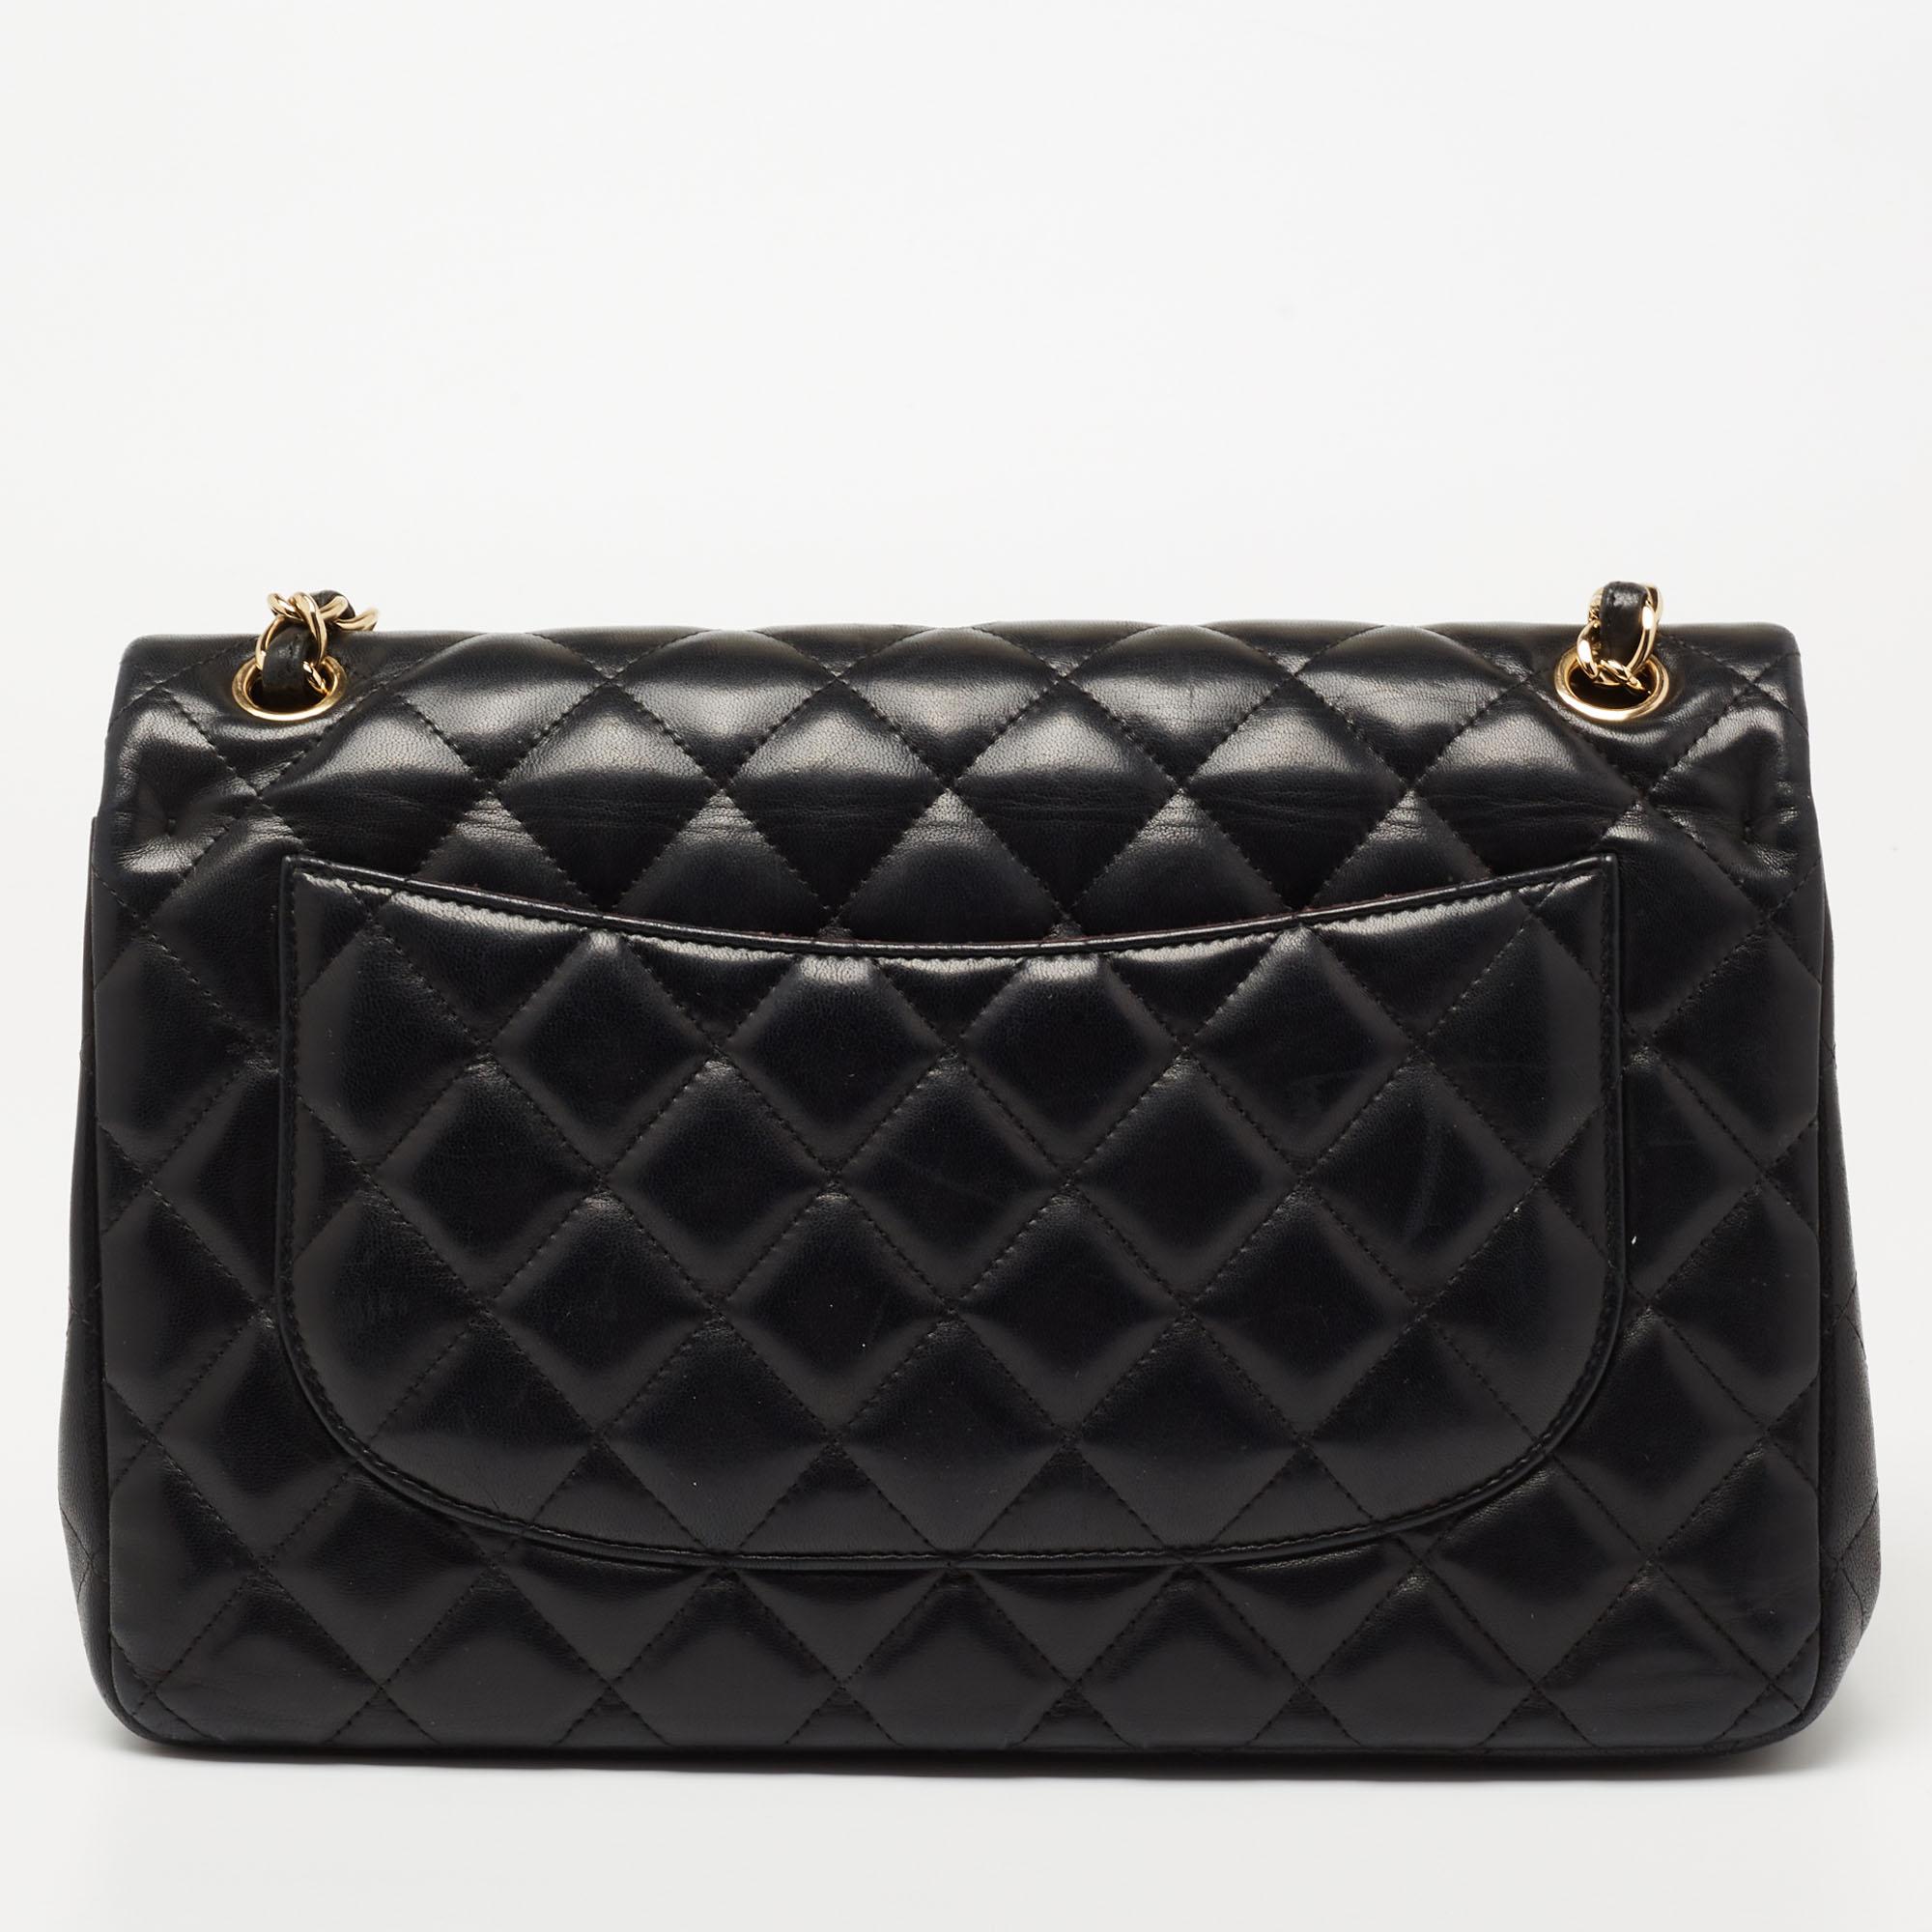 
We're bringing Chanel's iconic Classic Flap bag to your closet with this beautiful creation. Exquisitely crafted from quilted leather, it bears the signature label inside the leather interior and the iconic CC turn-lock on the flap. The Chanel bag